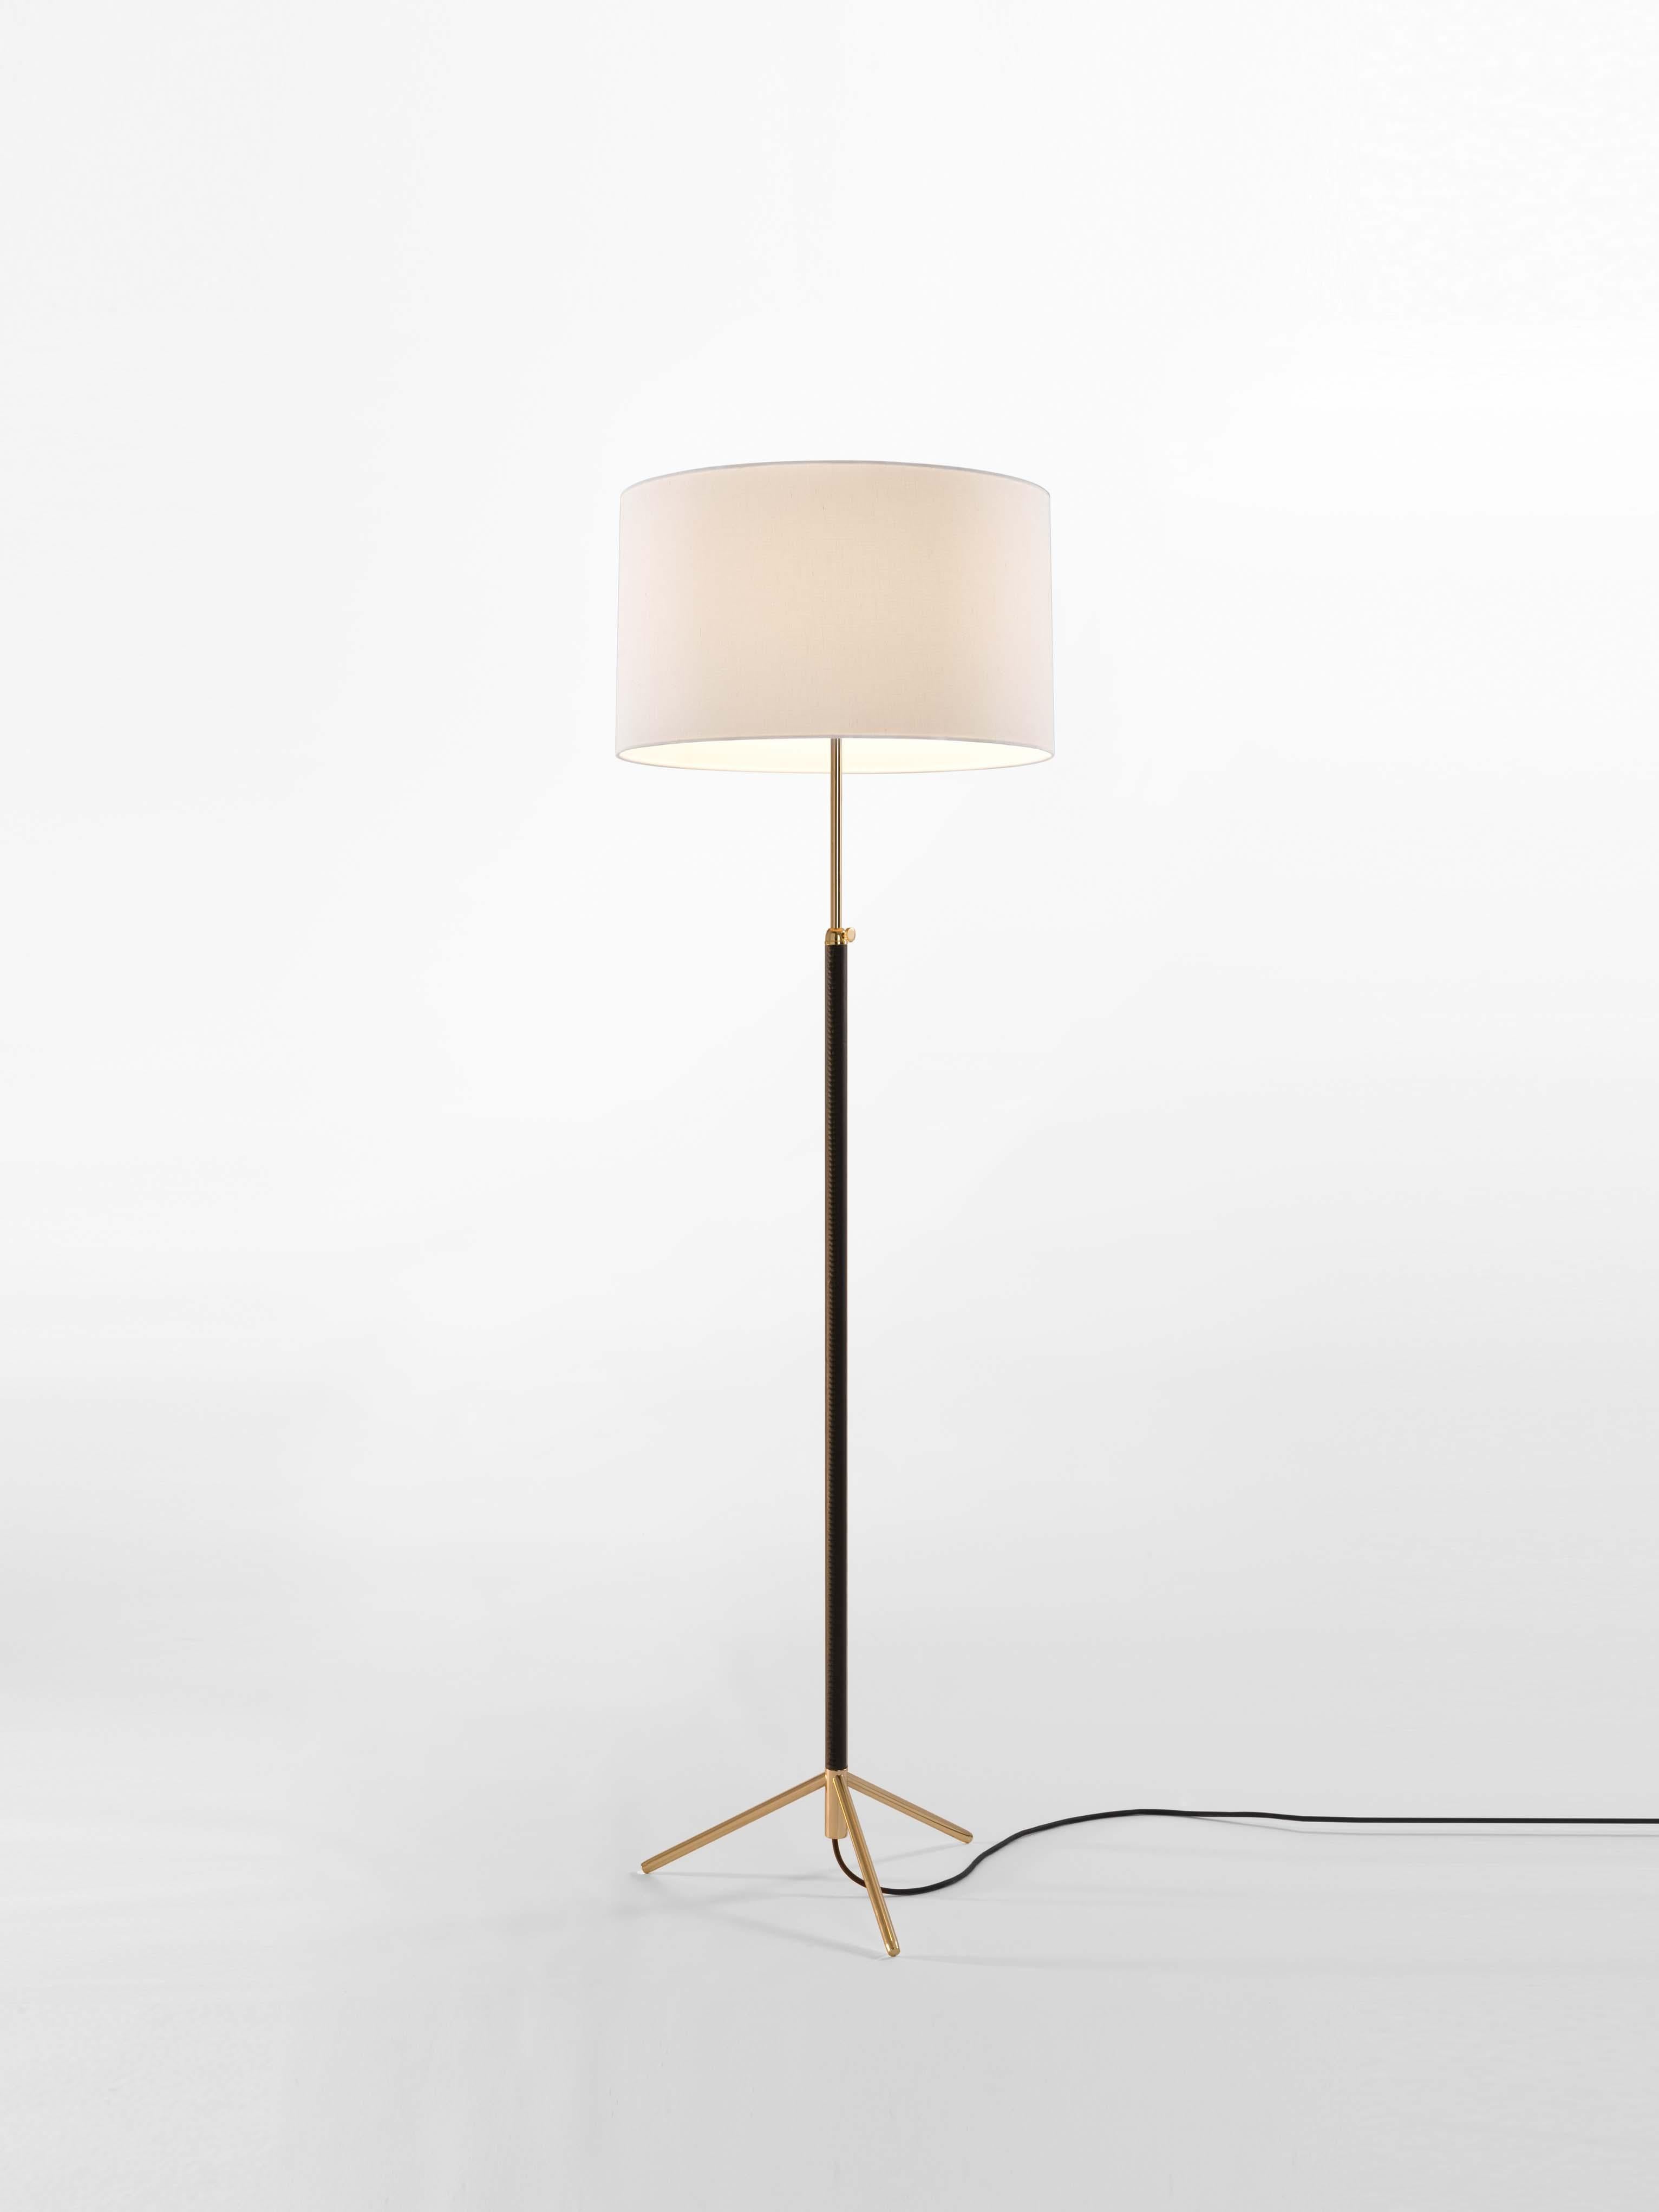 White and brass Pie de Salón G2 floor lamp by Jaume Sans
Dimensions: D 45 x H 120-160 cm
Materials: Metal, leather, linen.
Available in chrome-plated or polished brass structure.
Available in other shade colors and sizes.

This slender